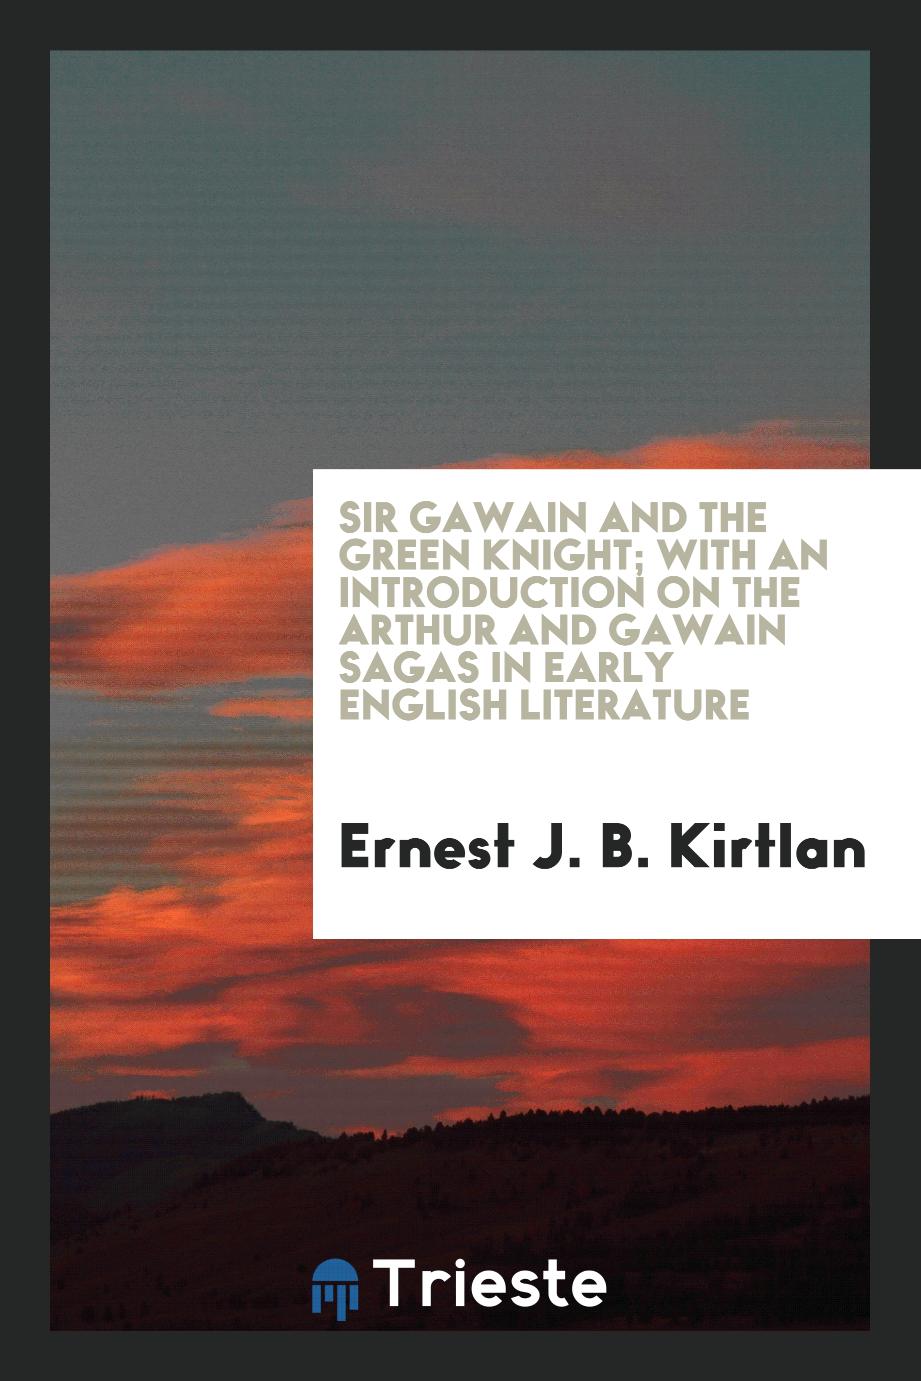 Sir Gawain and the Green Knight; with an introduction on the arthur and gawain sagas in early english literature